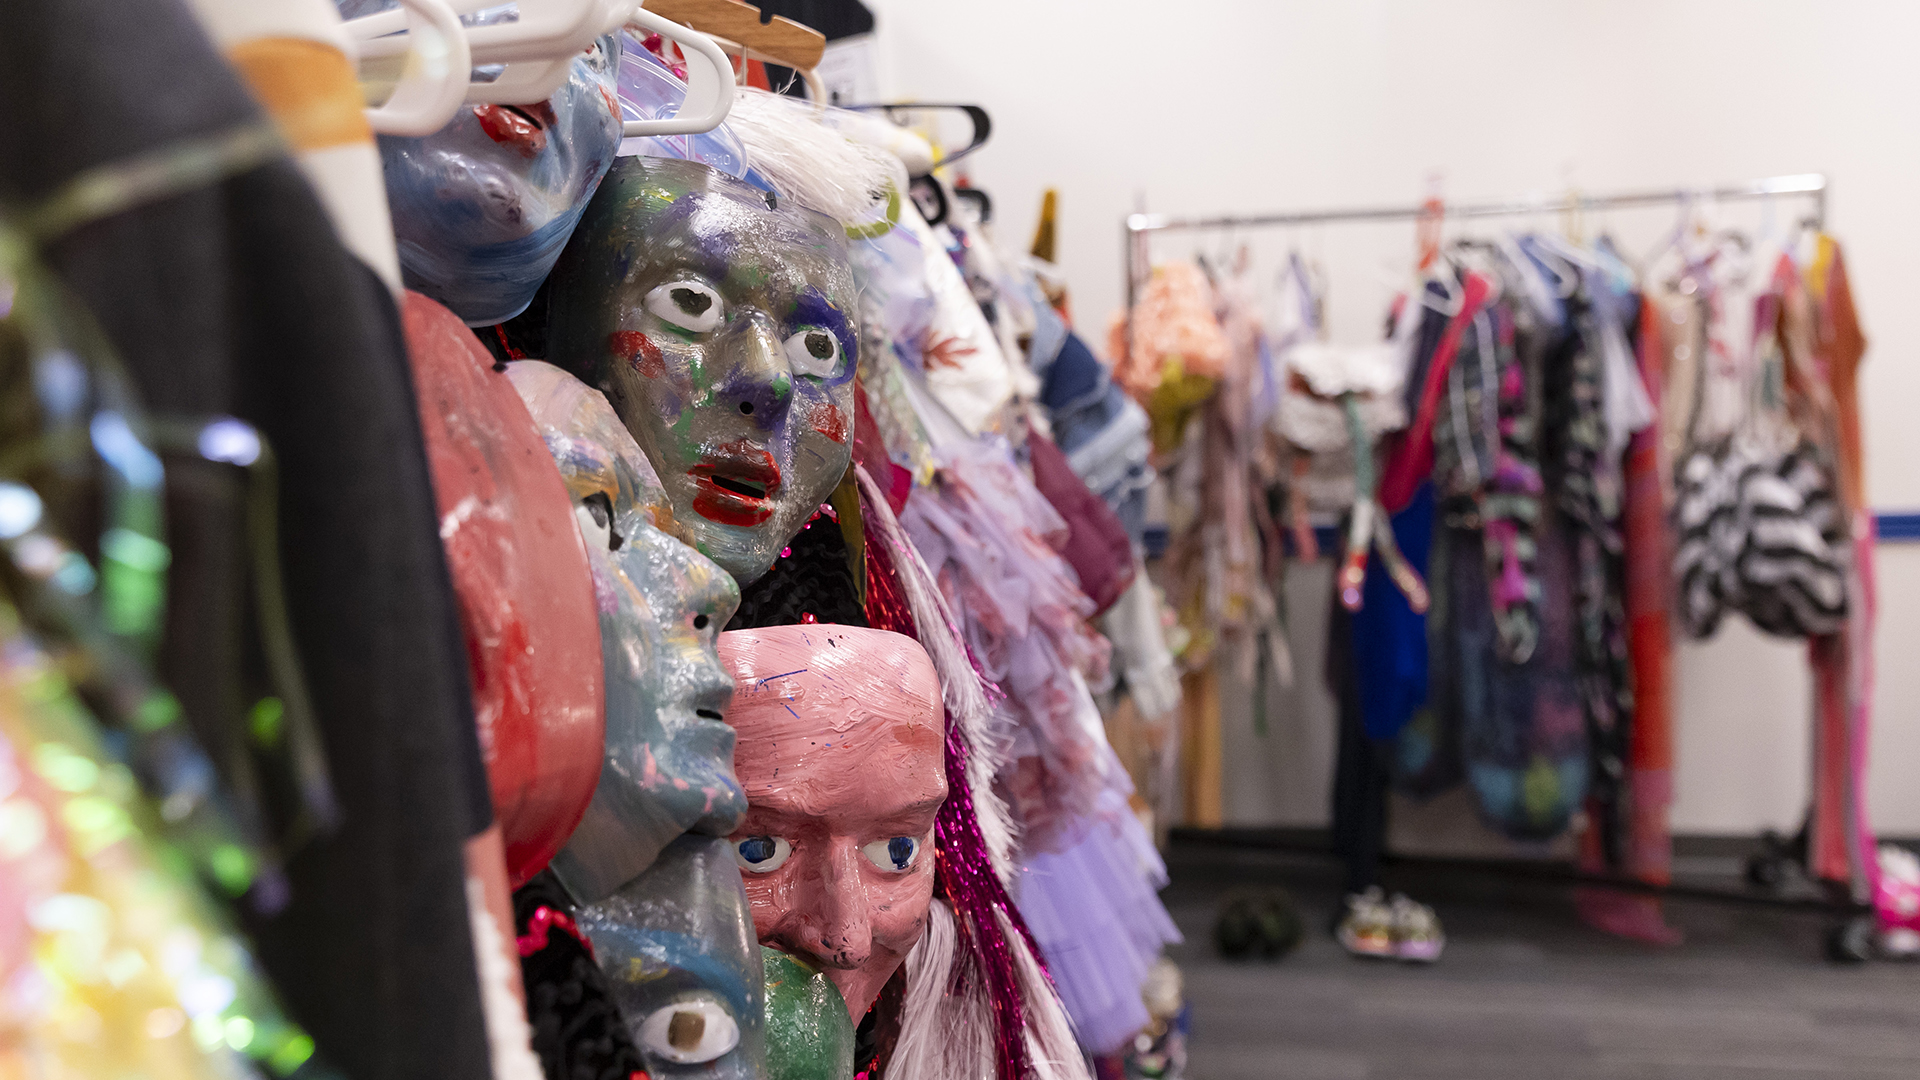 Costumes and masks hang from racks in a dressing room